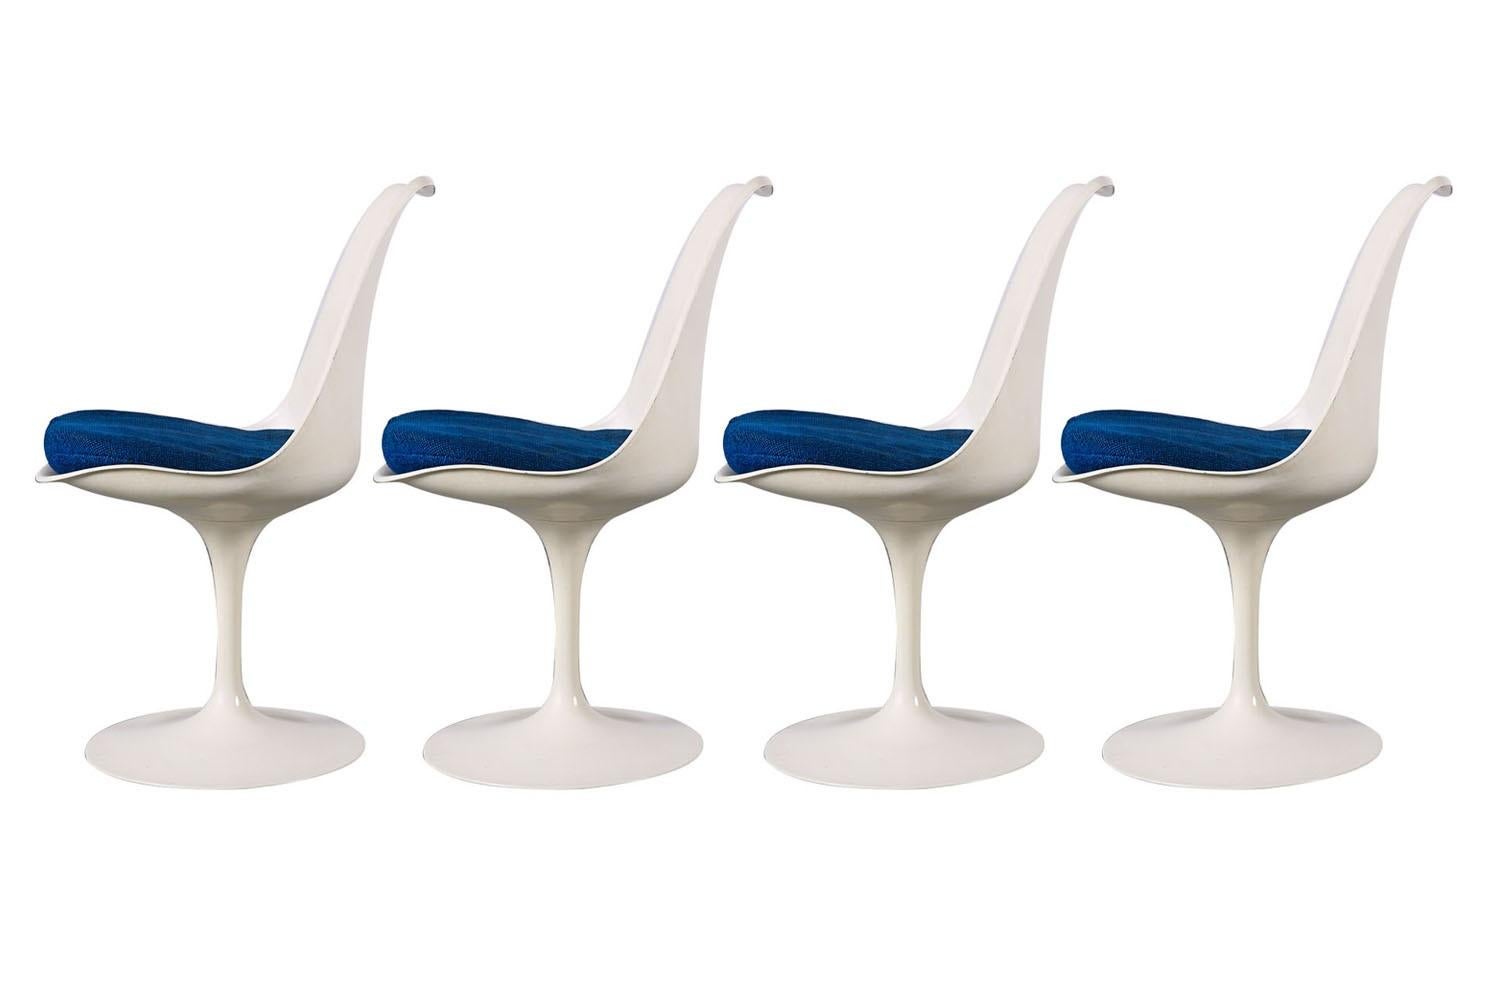 Classic Mid-Century Modern set of four armless tulip, side, dining chairs, for Knoll designed by Eero Saarinen (USA 1910-1961) for Knoll Furniture International in 1956. Features molded white lacquered fiberglass form resting on cast aluminum swivel